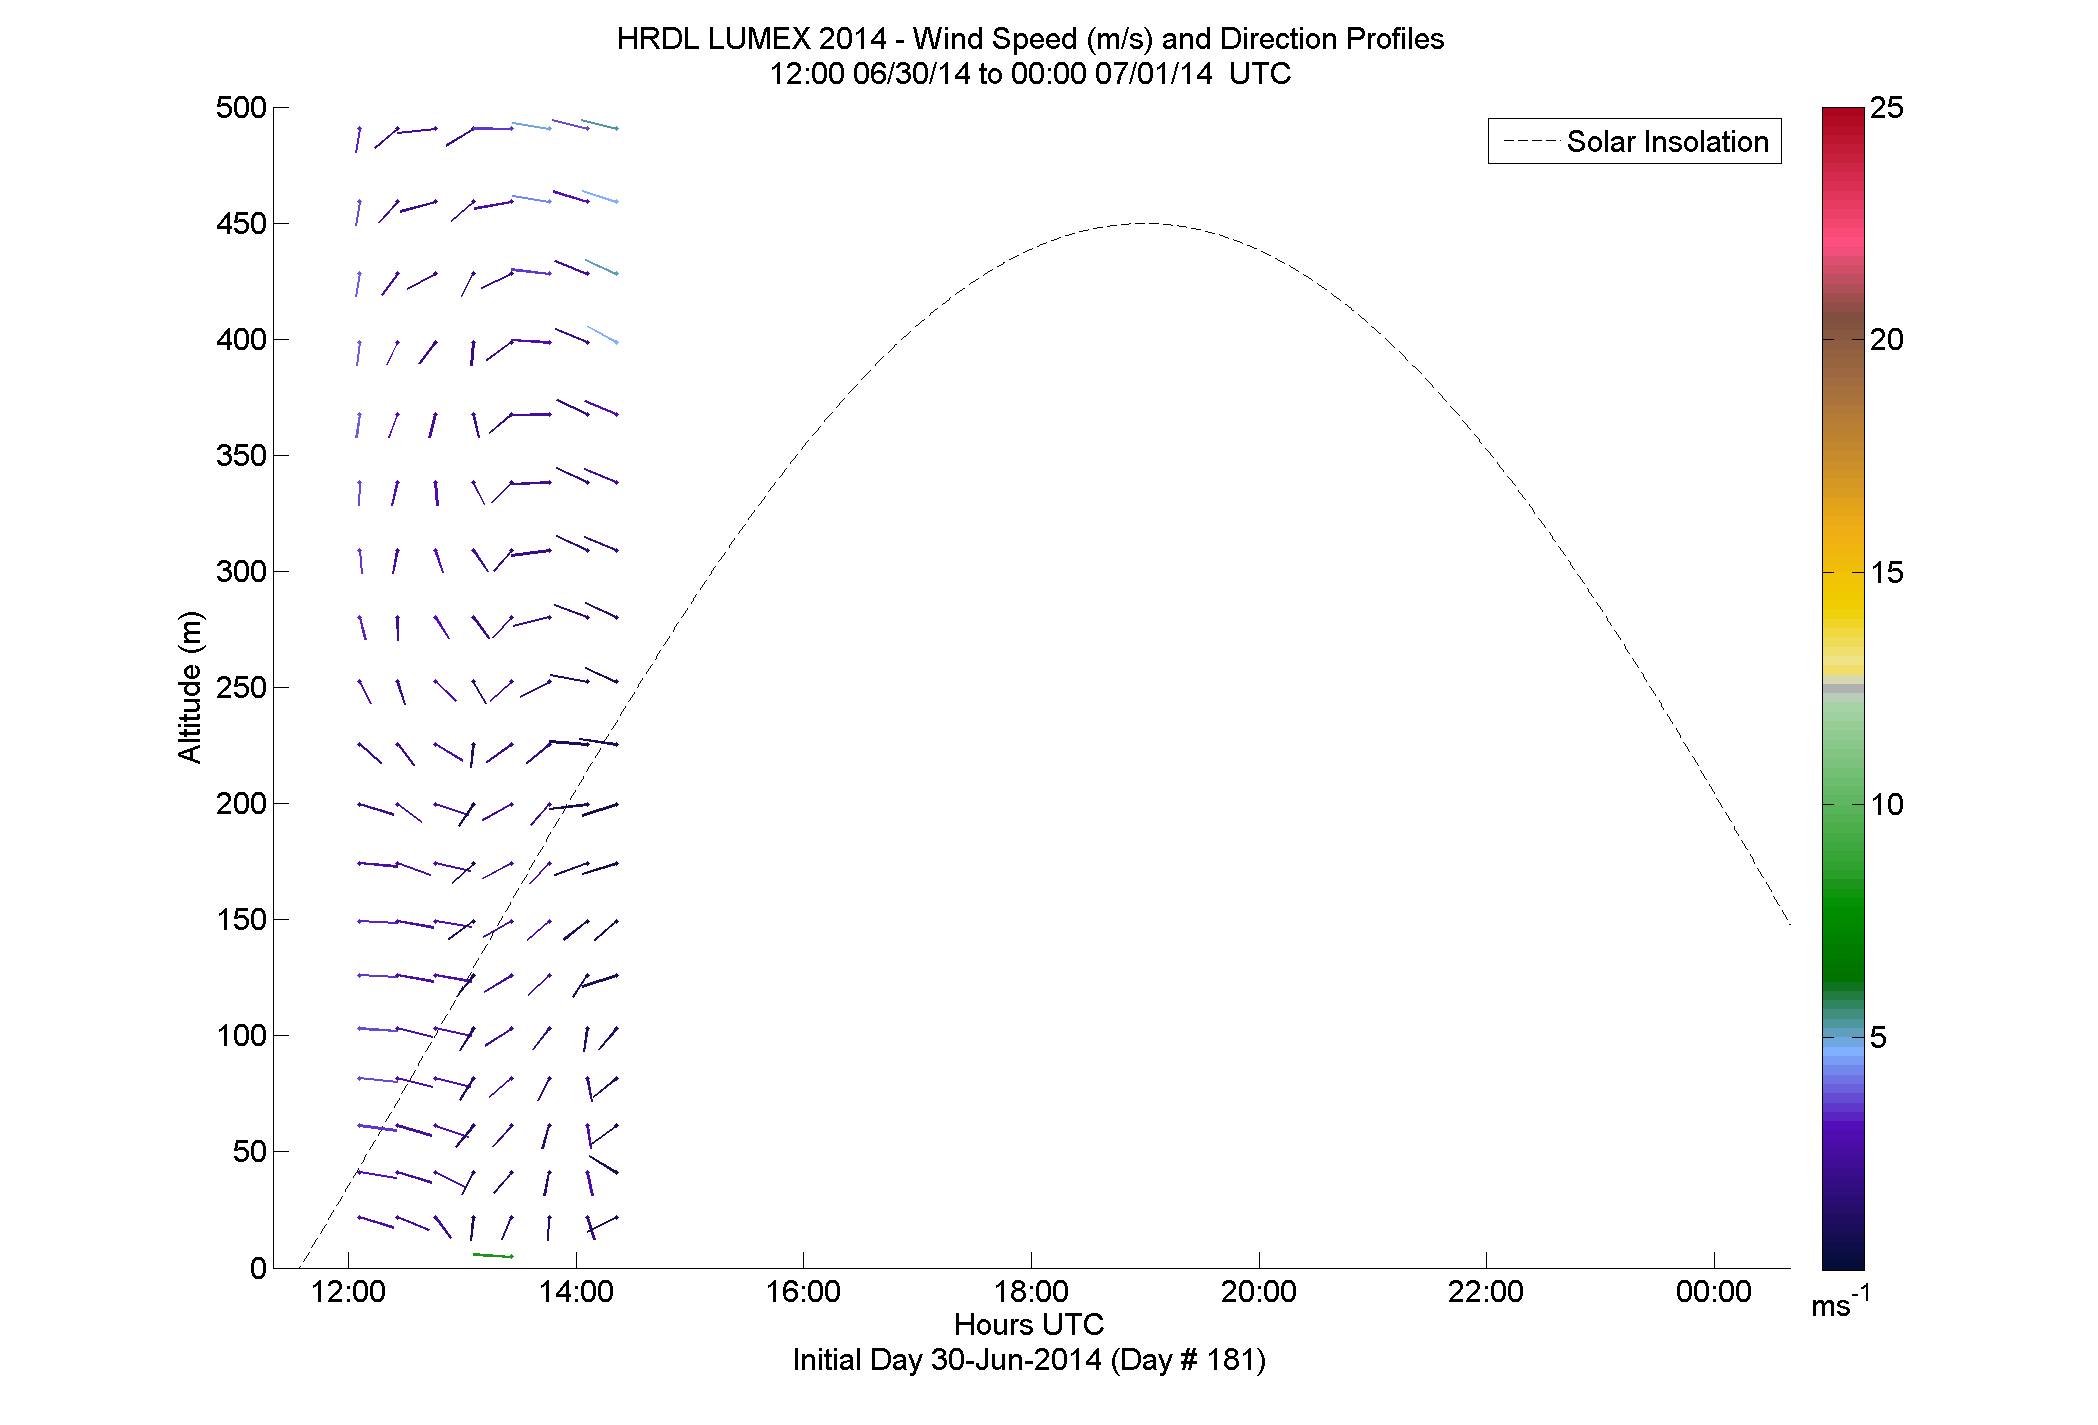 HRDL speed and direction profile - June 30 pm